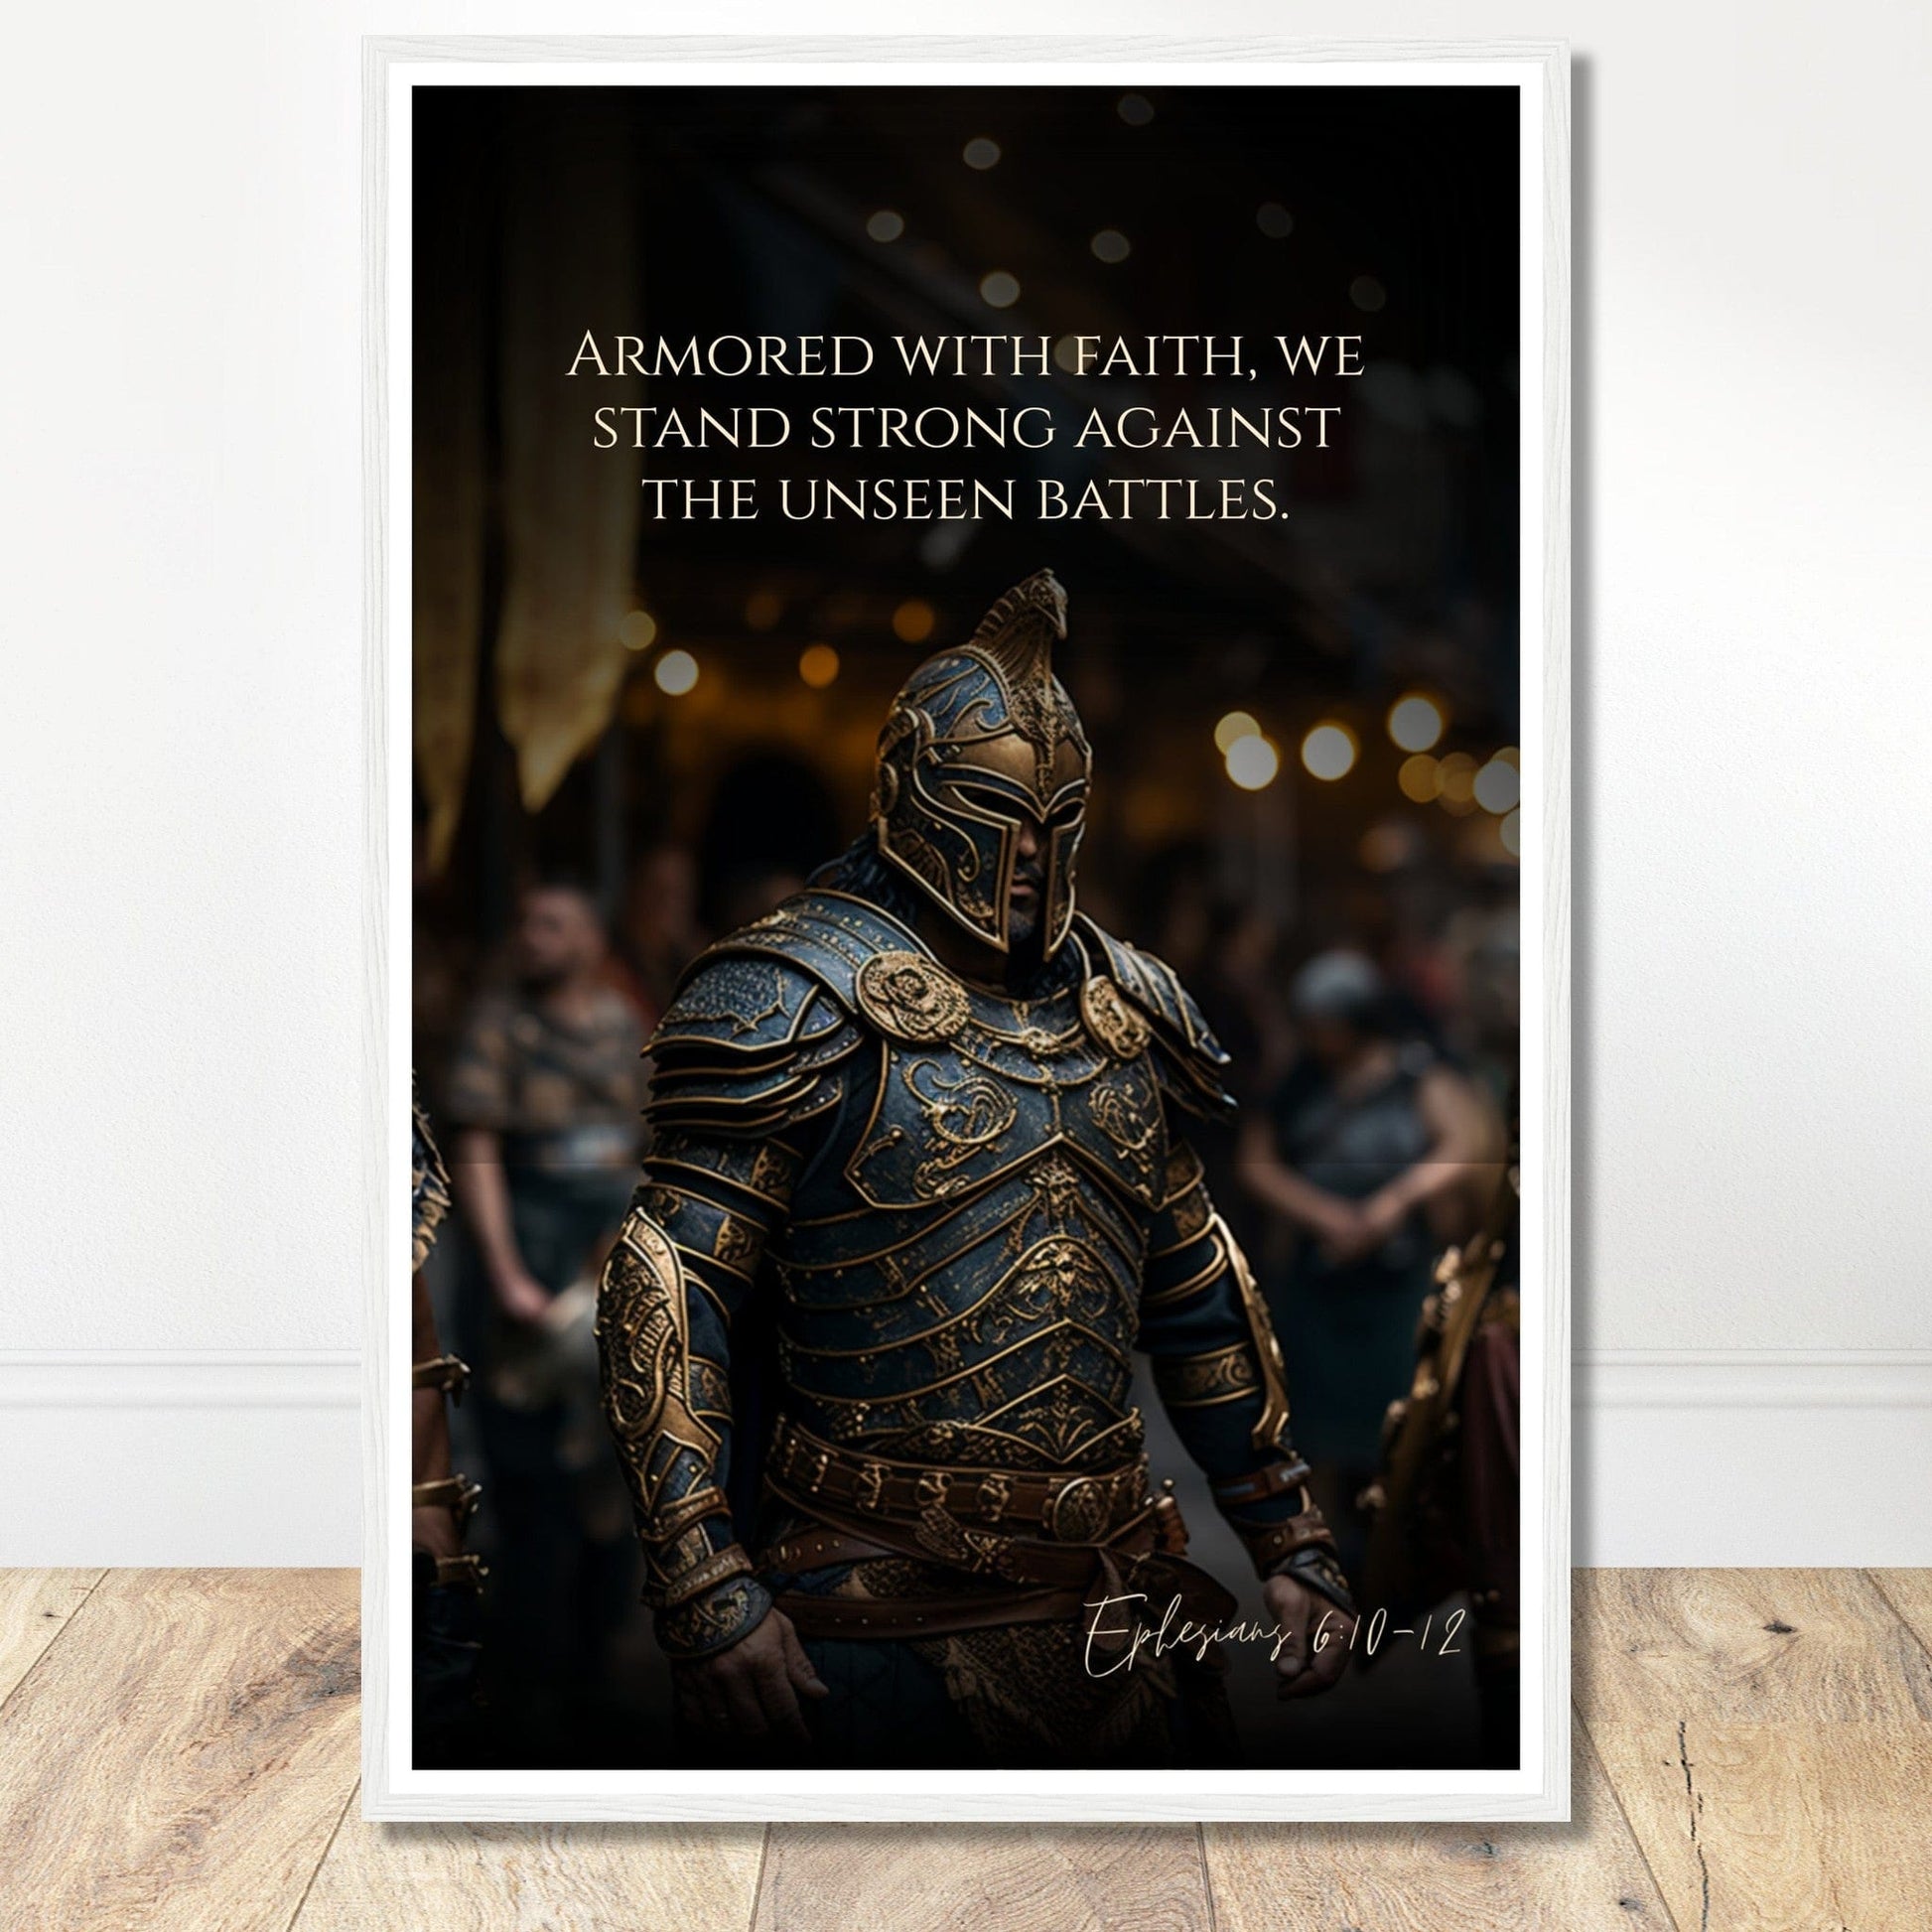 Coffee With My Father Print Material 60x90 cm / 24x36″ / Premium Matte Paper Wooden Framed Poster / White frame The Unseen Battles: Ephesians 6:10-12 - Artwork